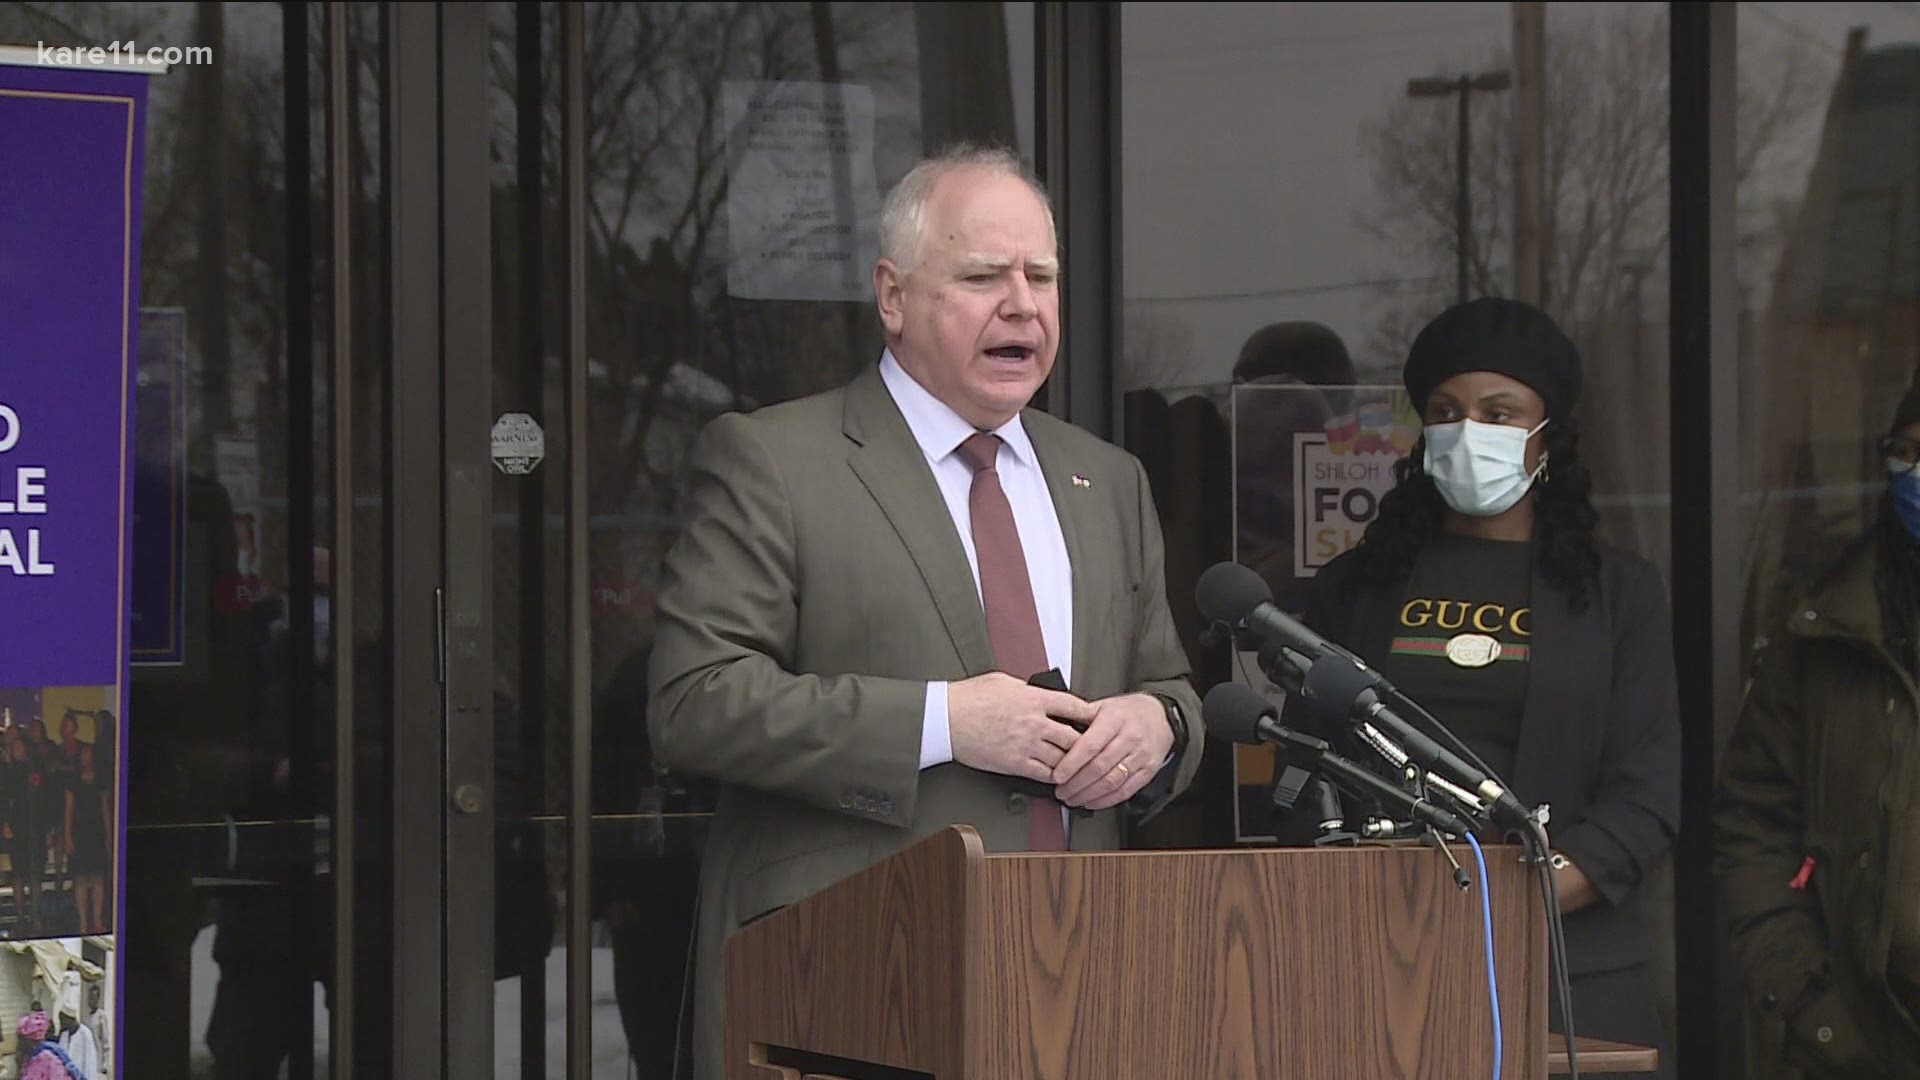 Walz said the state has partnered with more than 30 "COVID-19 Community Coordinators" -- organizations that will connect people to information about the vaccine.